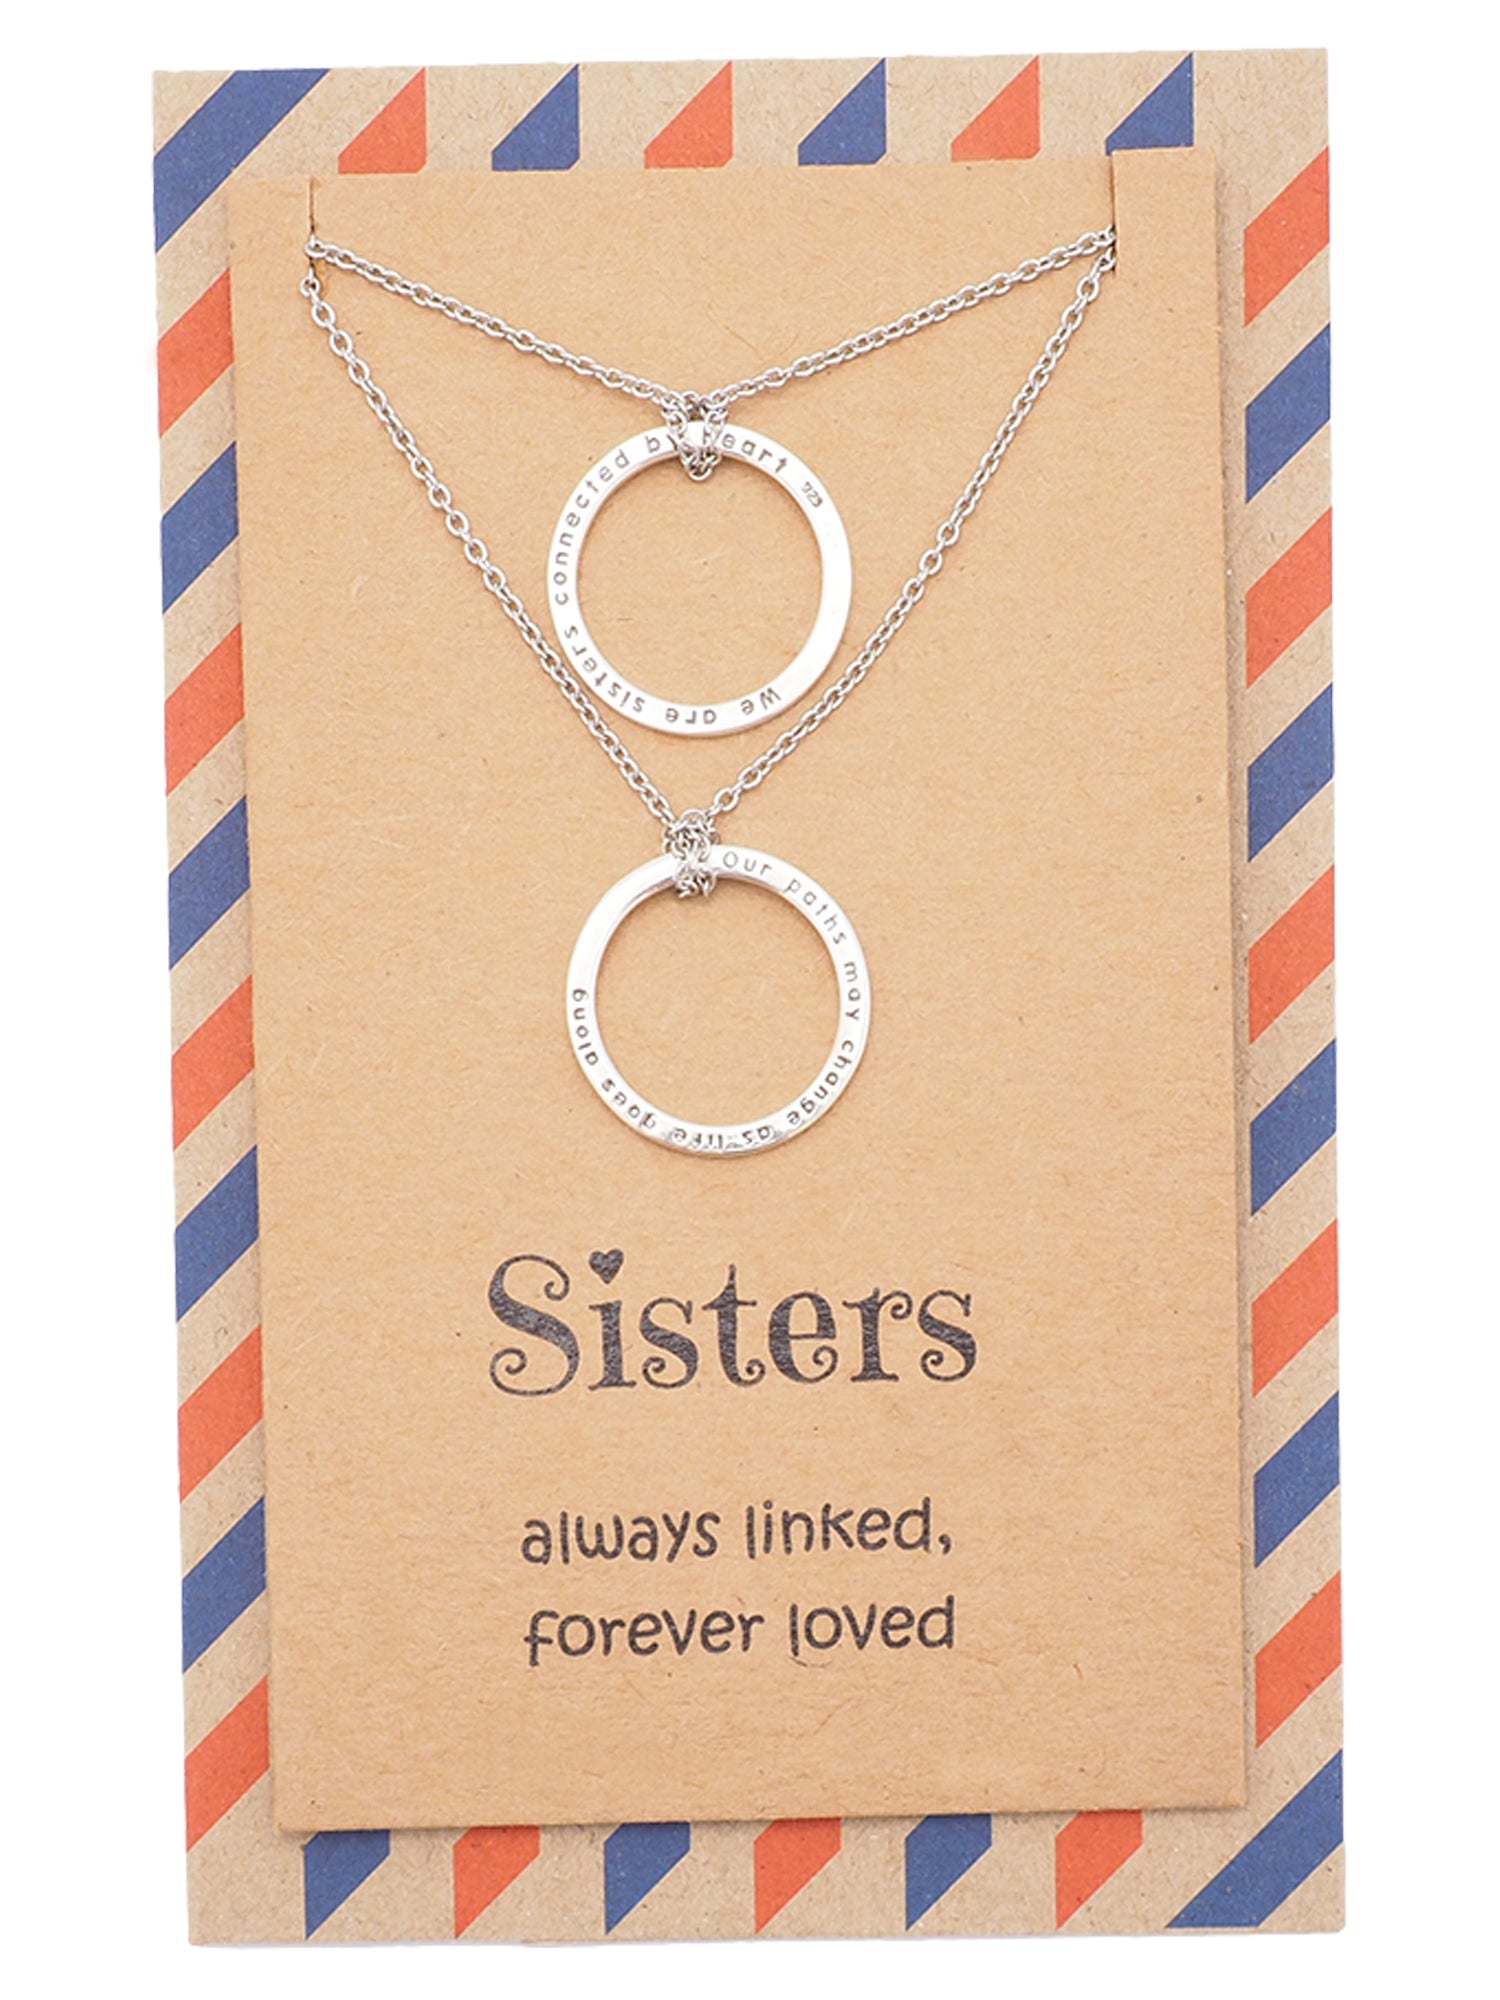 Matching Necklaces for 4, Sister Necklace for 5, Friendship Necklace for 3,  4 Sister Necklace, 2 Best Friend Necklace, Best Friend Gift - Etsy